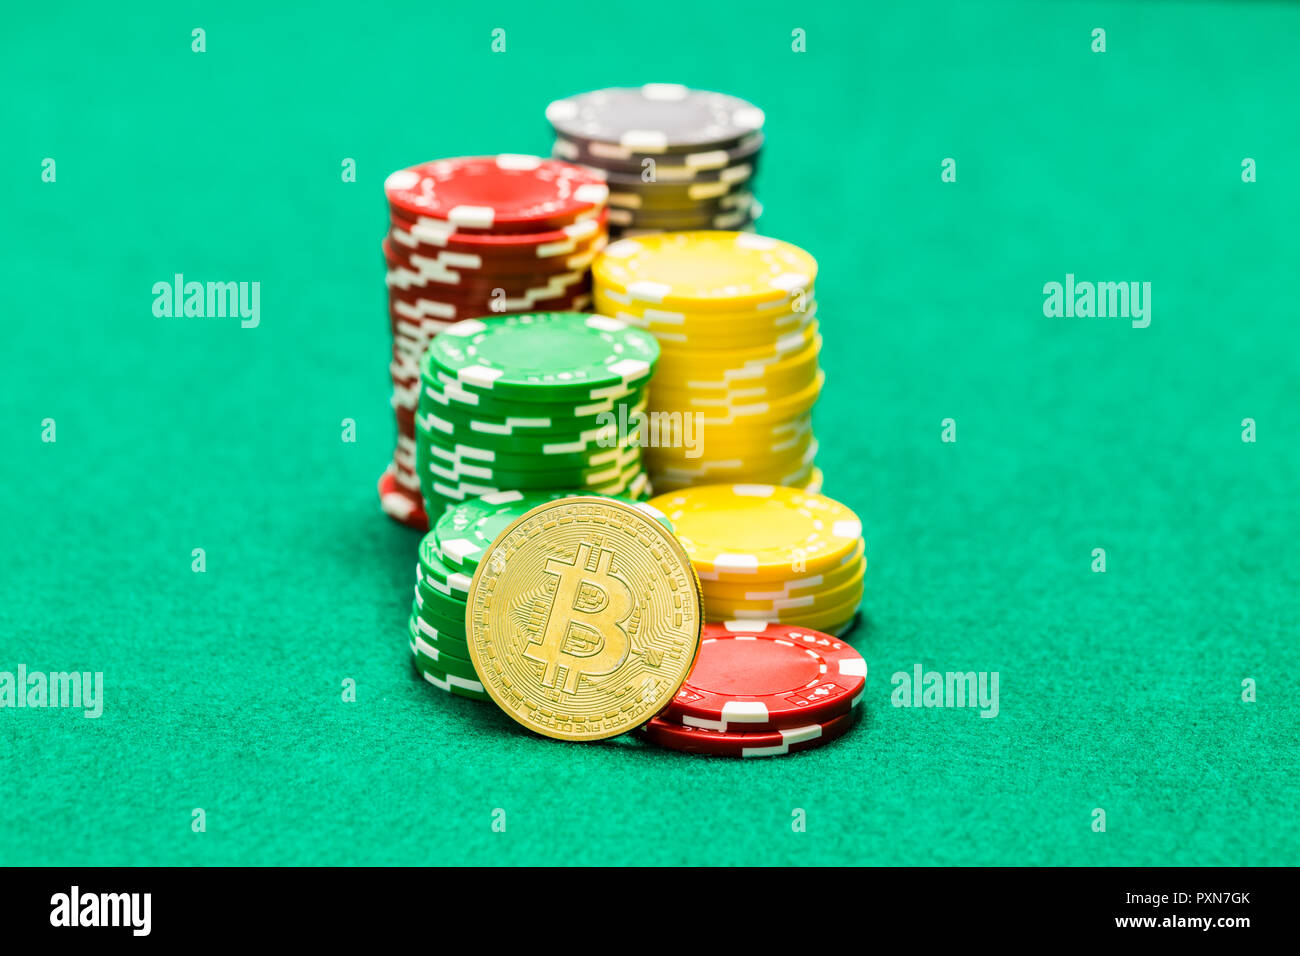 Finding Customers With crypto currency casino Part B